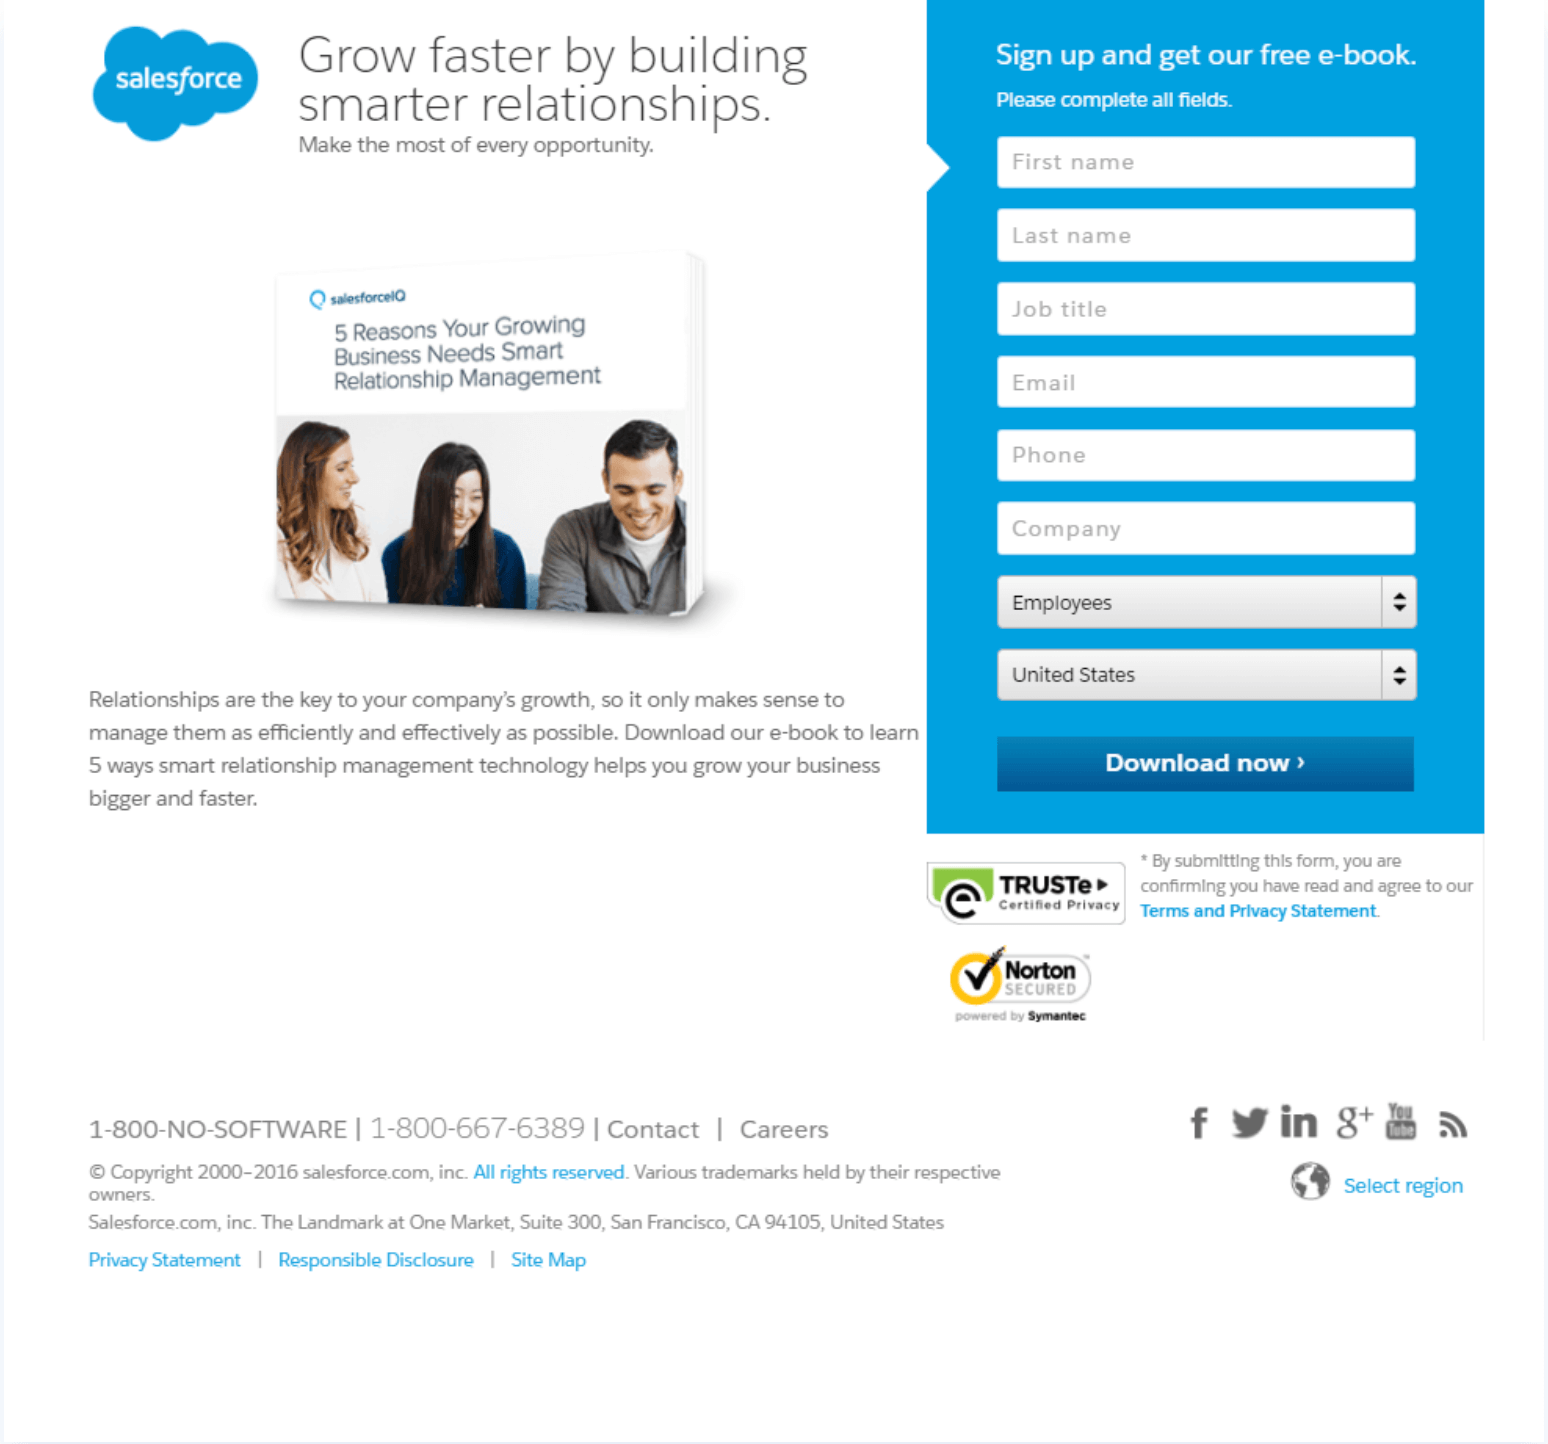 A landing page for Salesforce offering an ebook in exchange for contact information